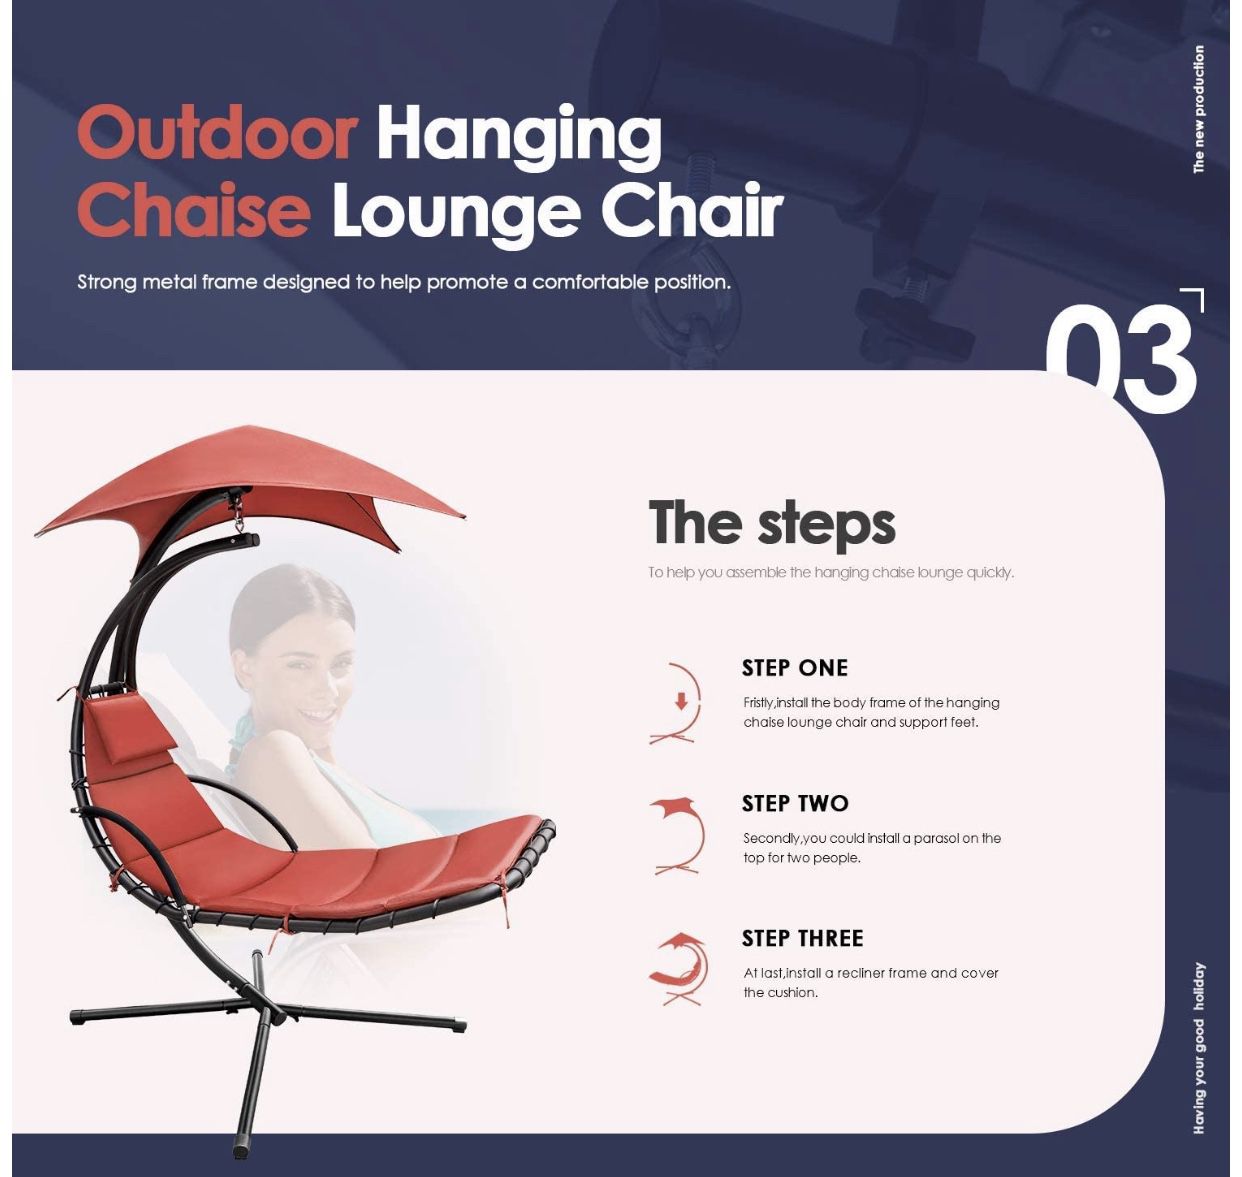 Shipping Only - Hammock Lounge Chair Outdoor Hanging Chaise Lounge Swing Chair Canopy Umbrella Sun Shade Free Standing Floating Bed Furniture for Bac